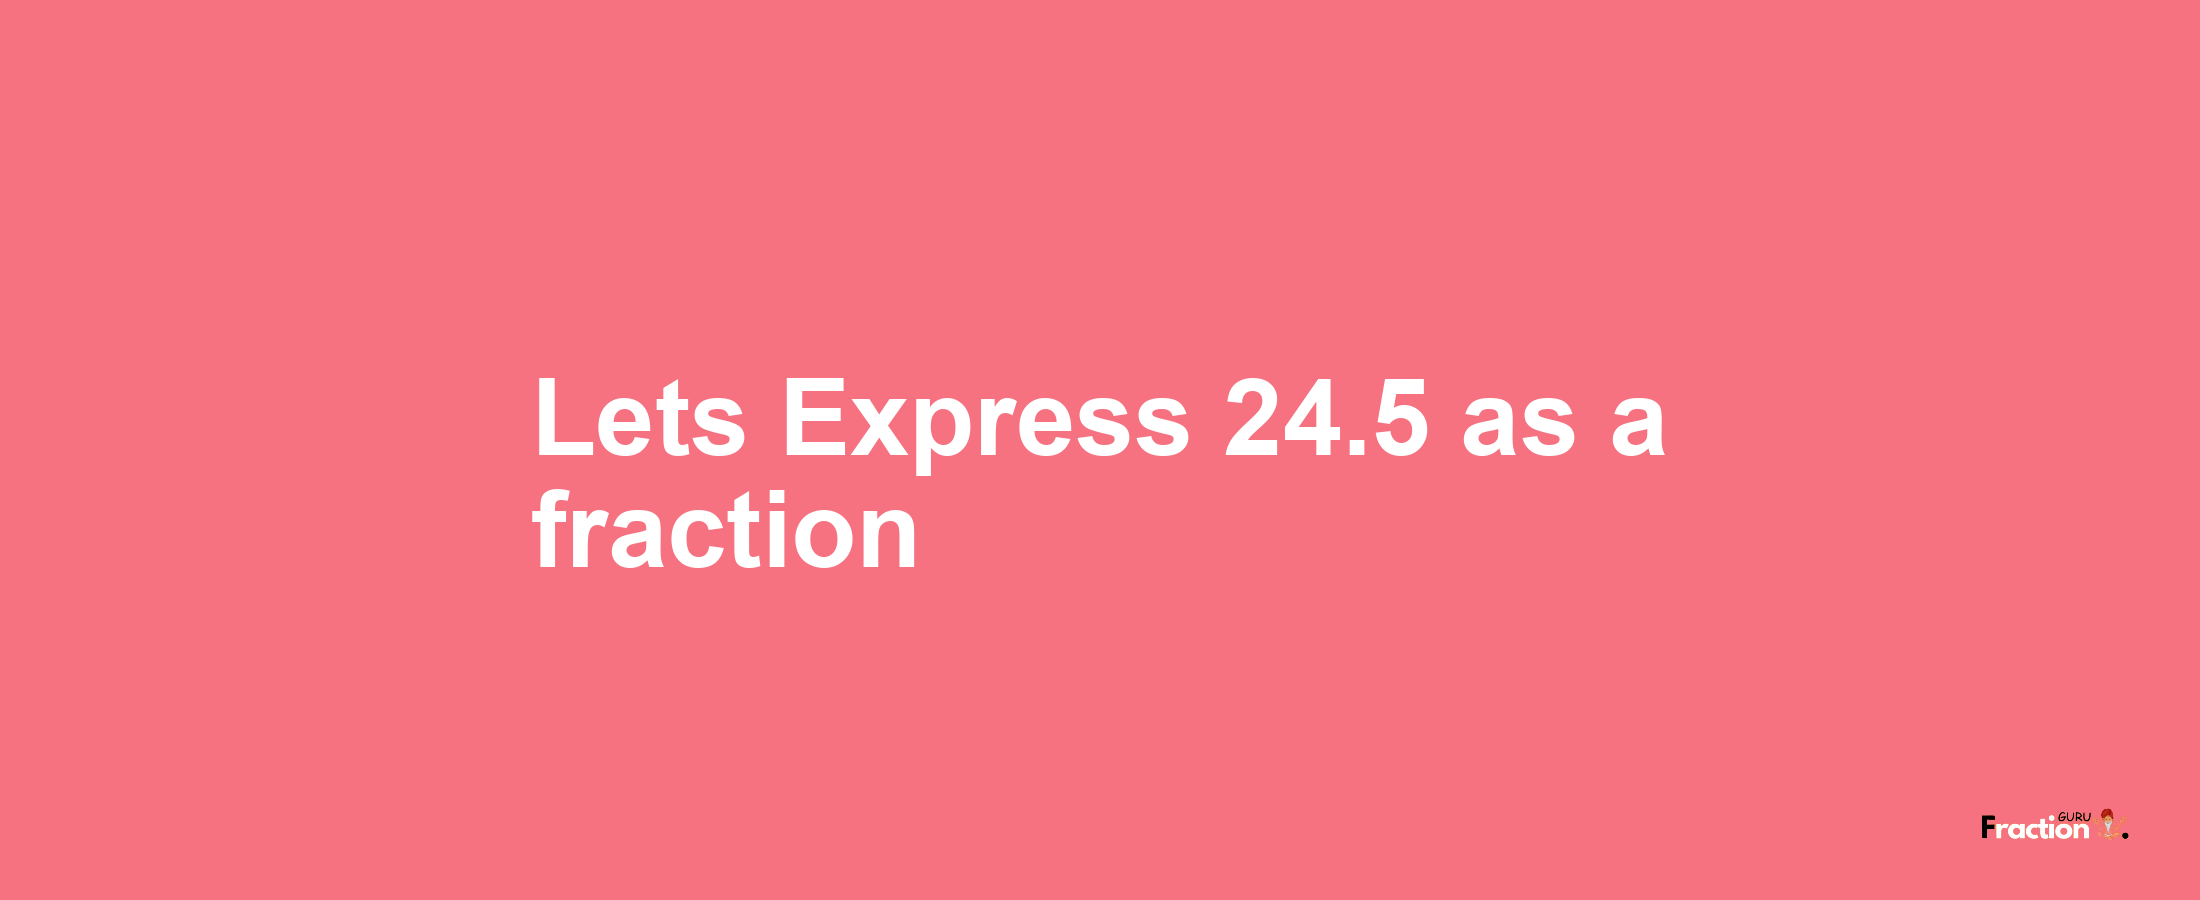 Lets Express 24.5 as afraction